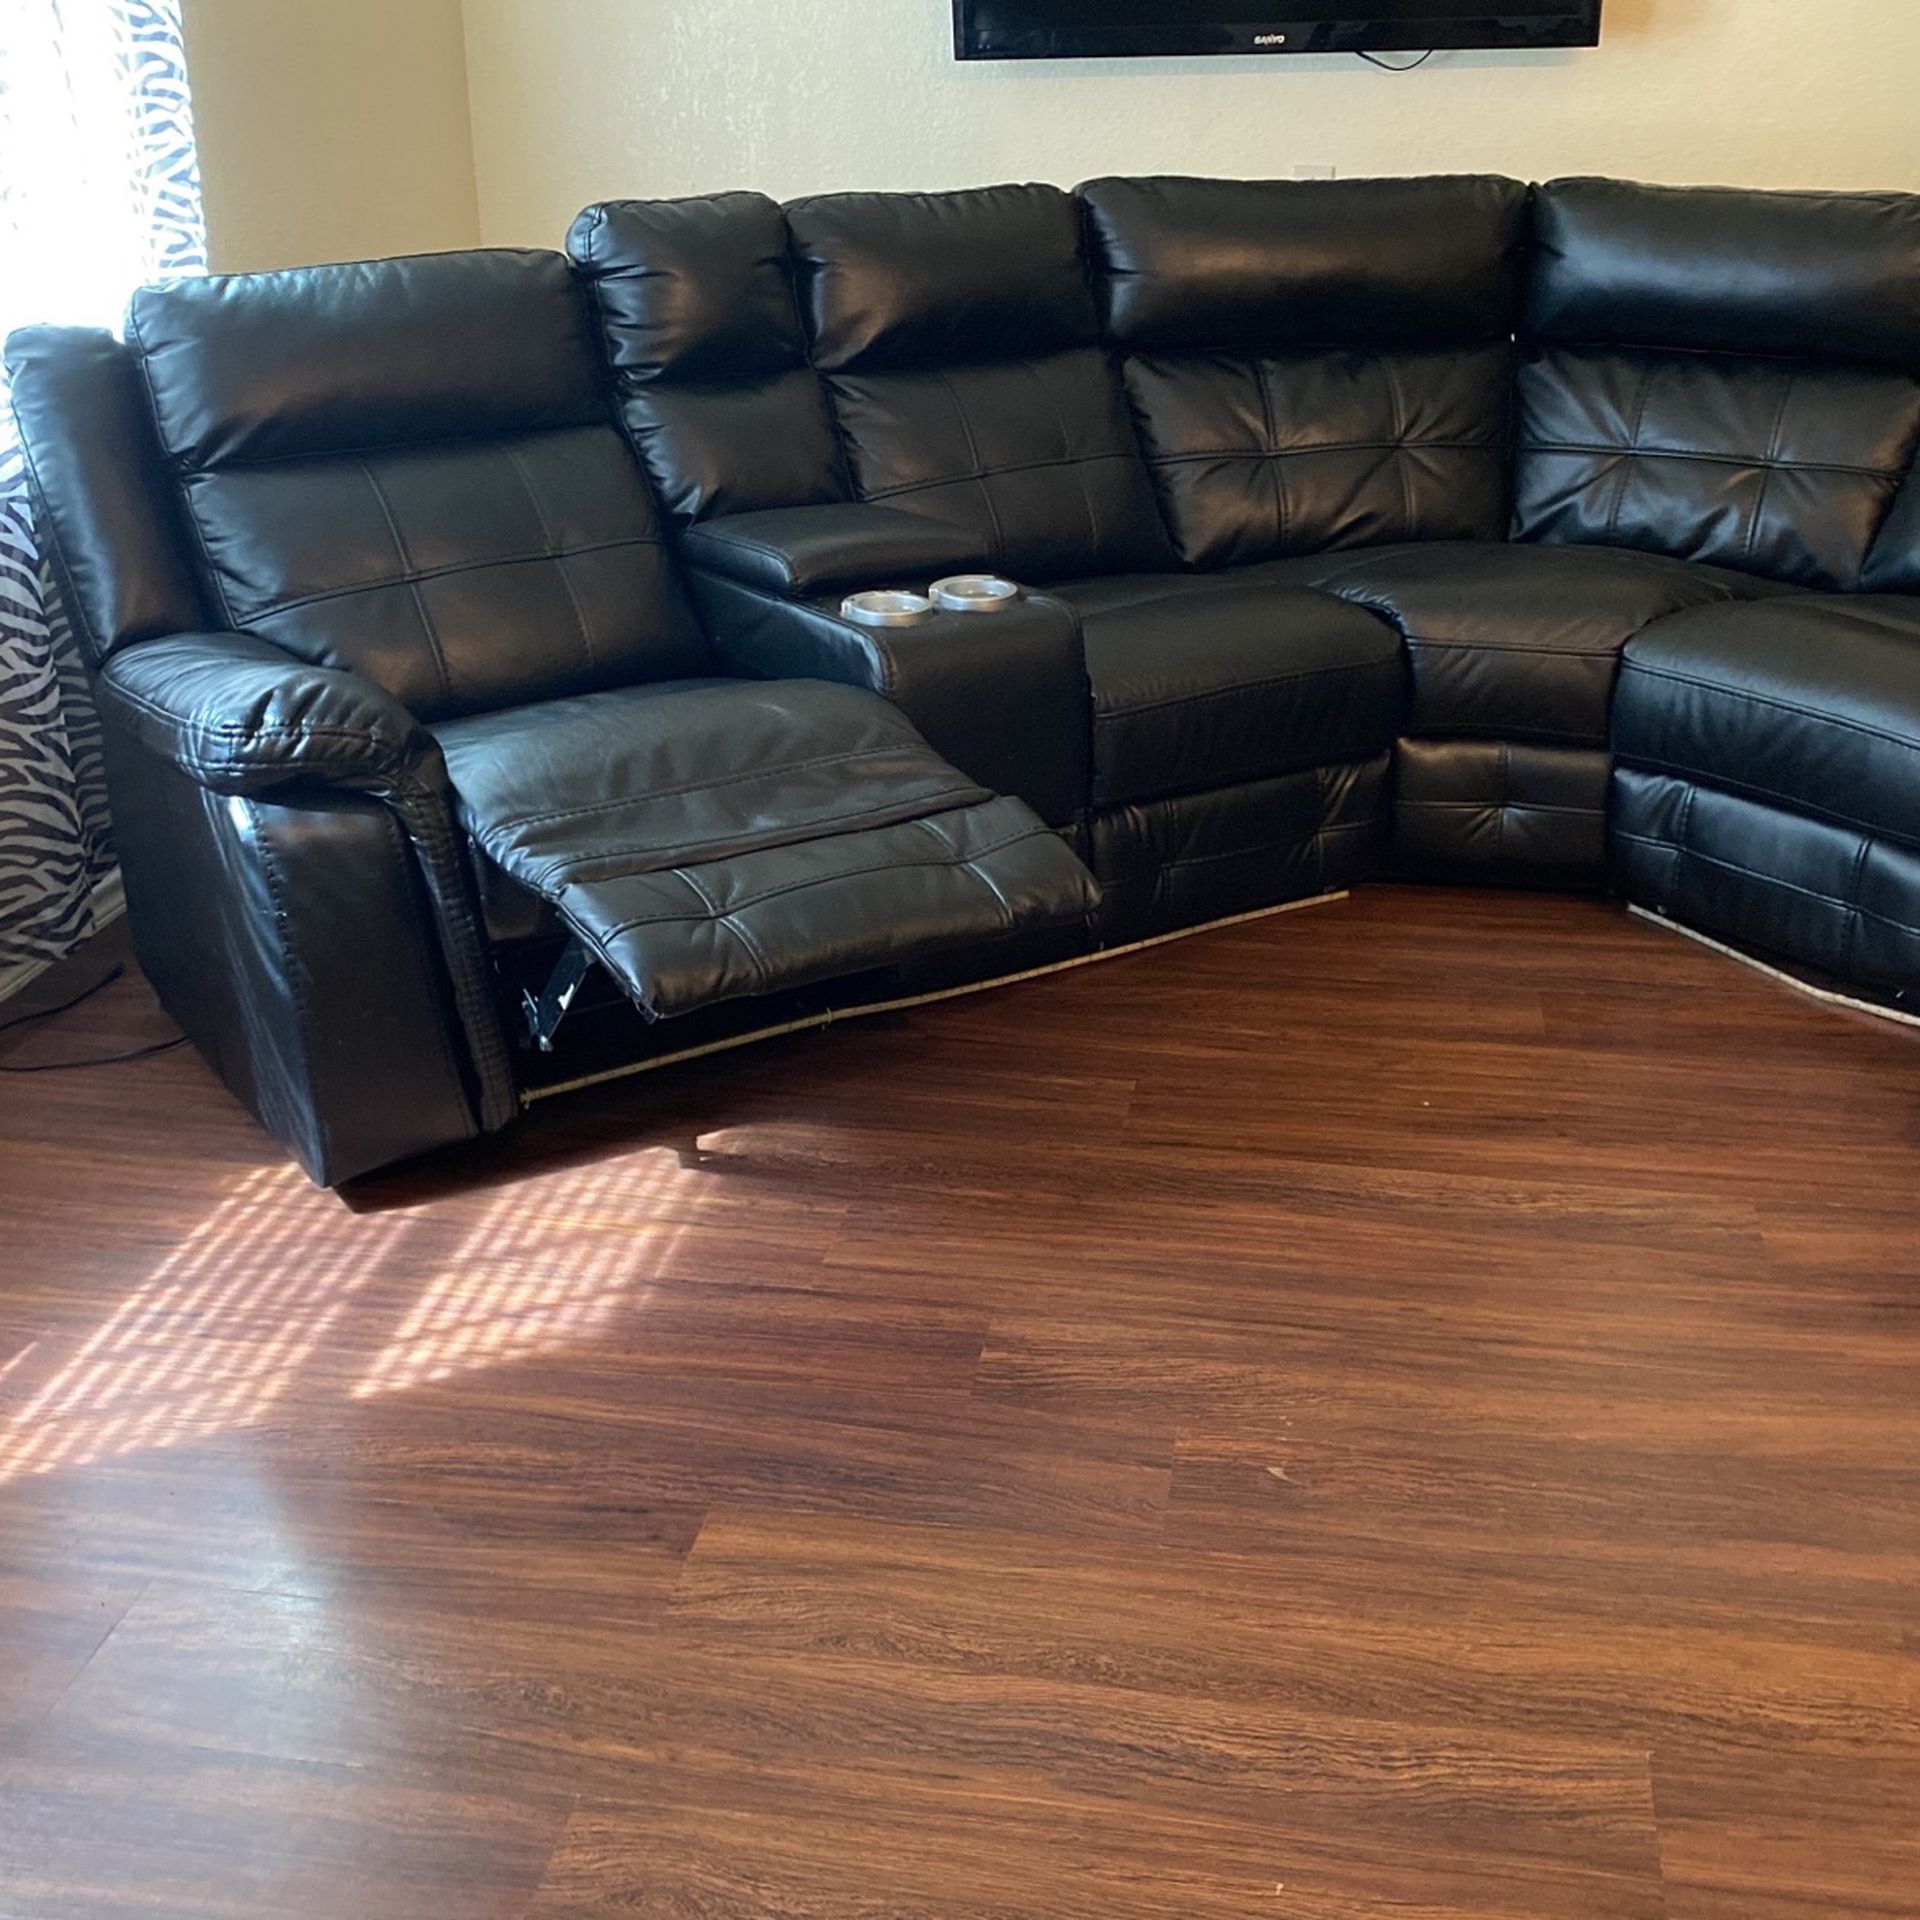 Black leather sofa sectional